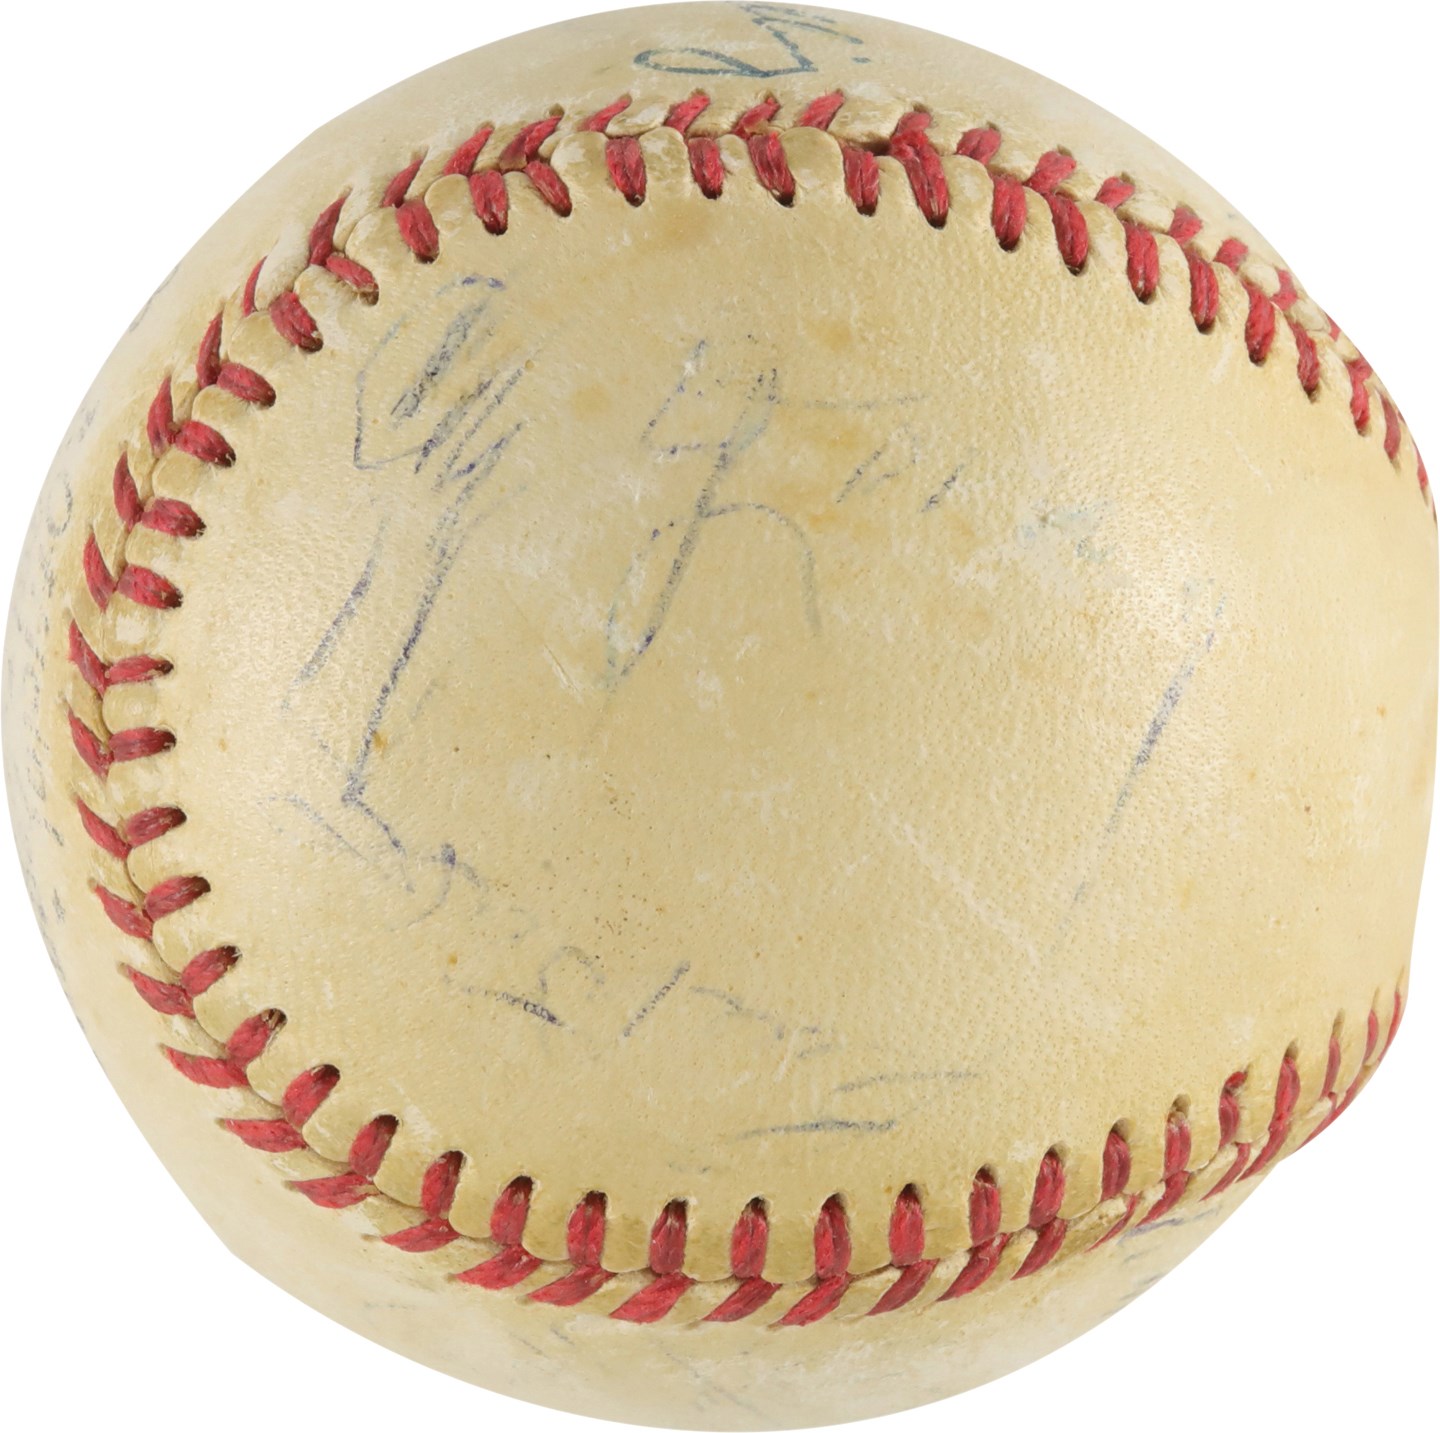 Baseball Autographs - 1954 New York Yankees and Stars Team-Signed Baseball w/Cy Young & Mickey Mantle (JSA)